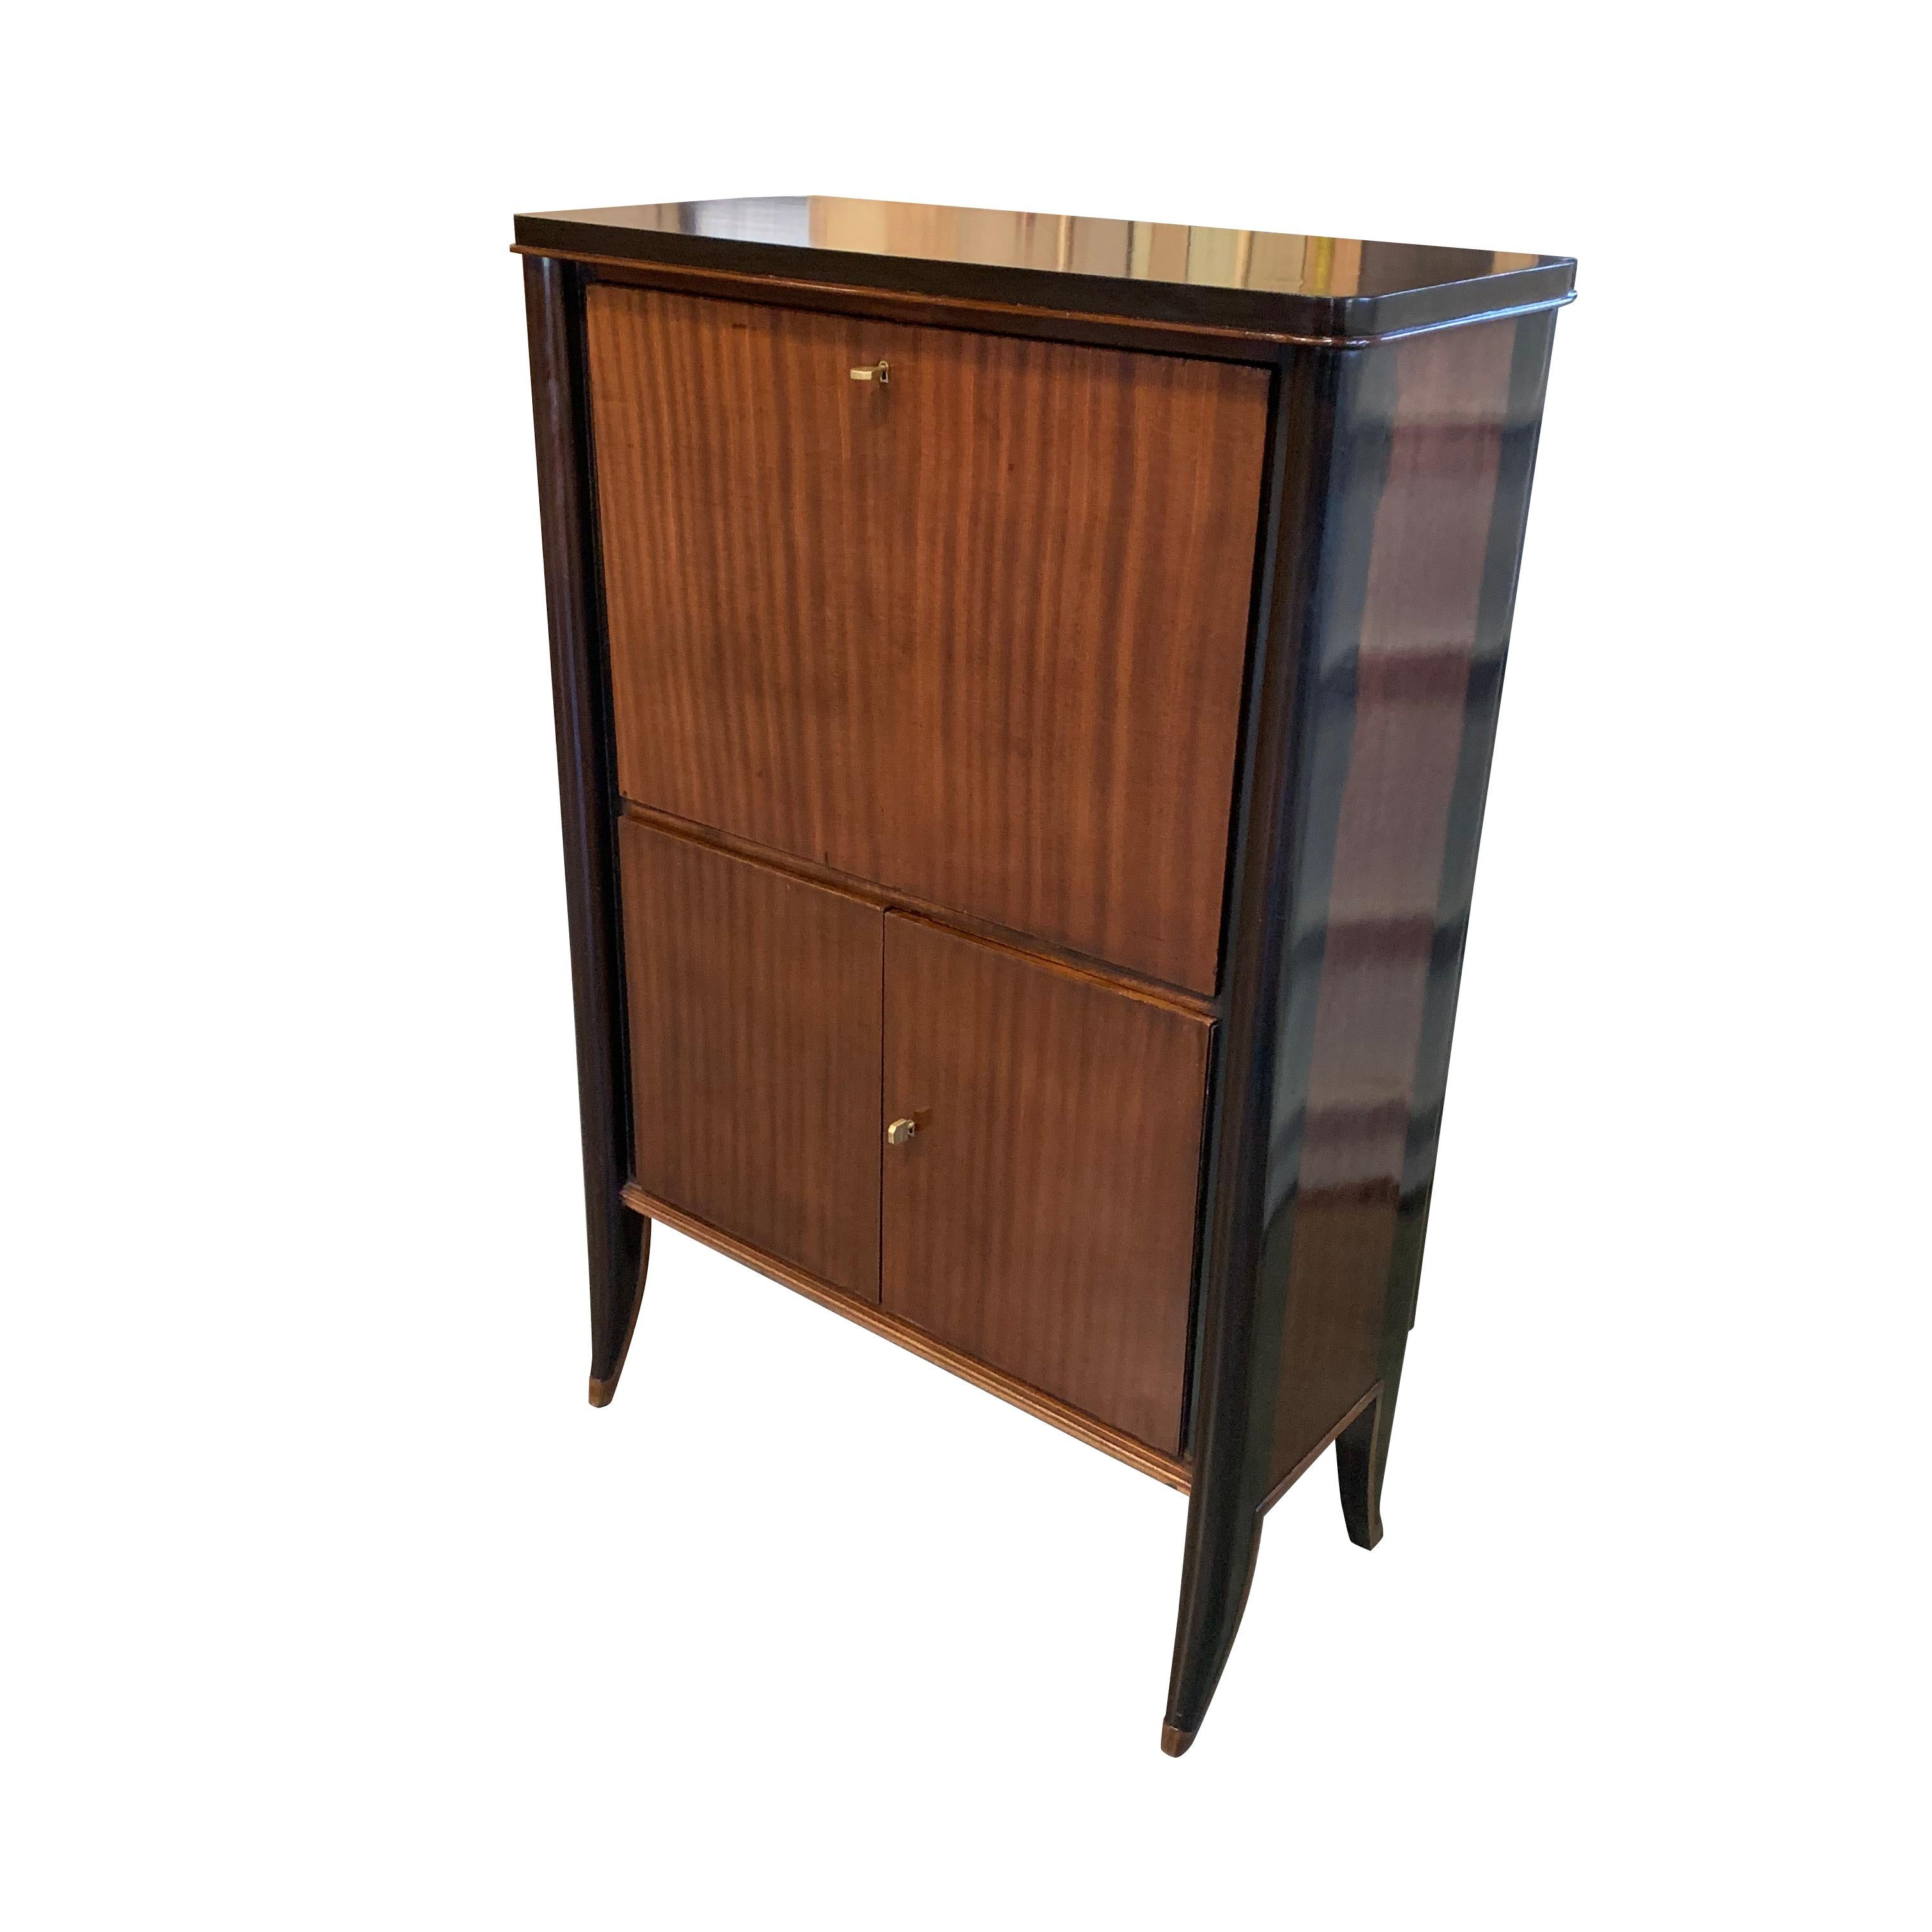 1940s French high polished palisander exterior with ebonized trim fold down desk
Upper cabinet interior with shelves and small door with interior compartment
Bottom two doors with interior shelves.
          